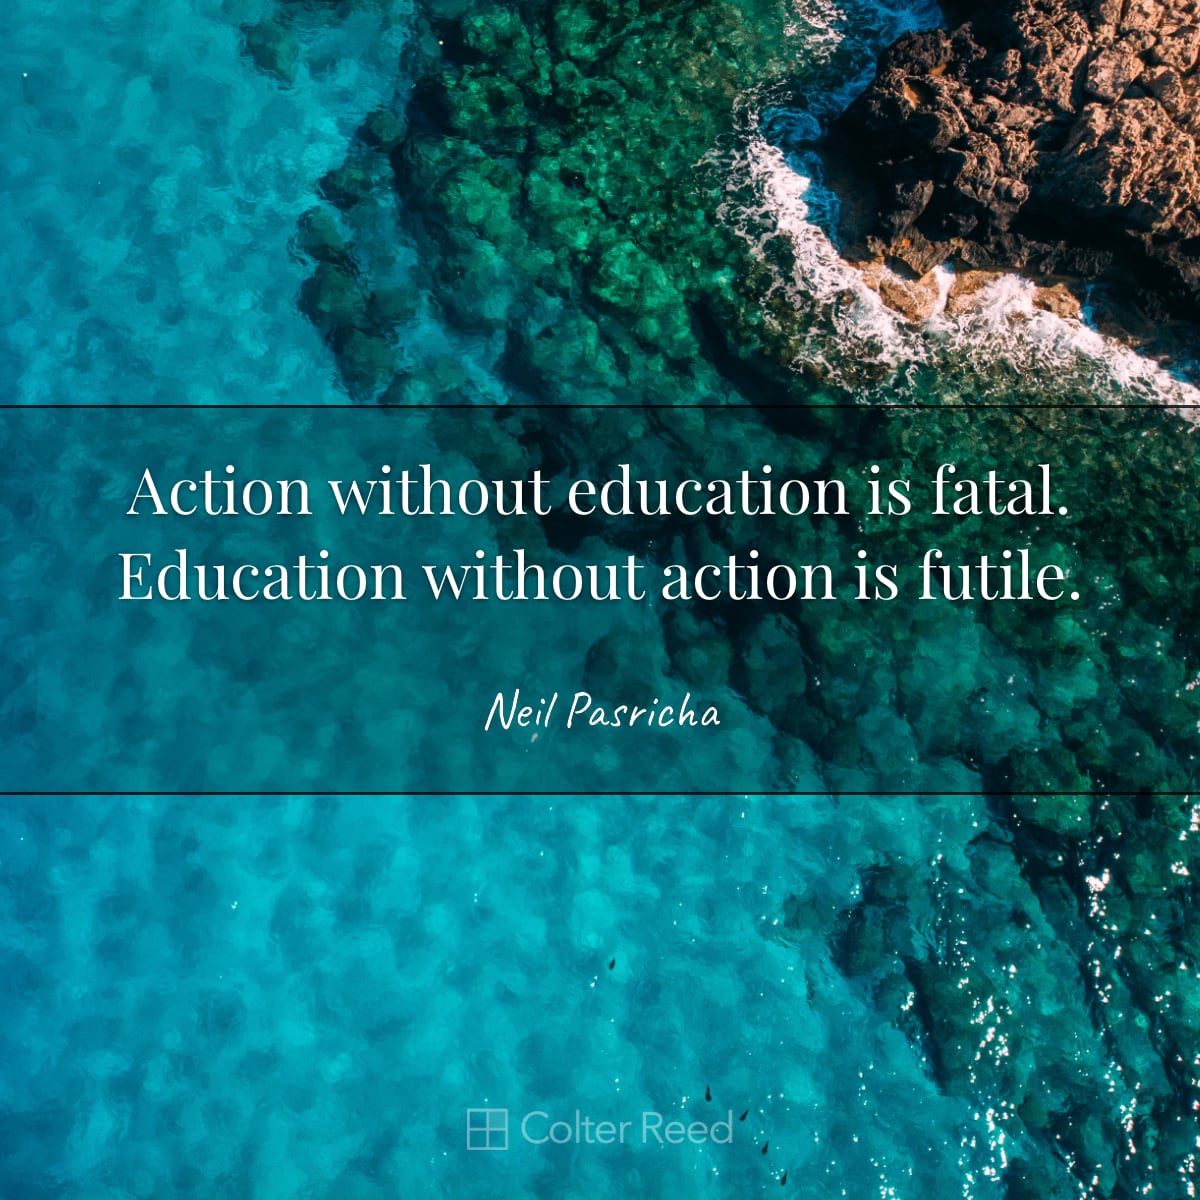 Action without education is fatal. Education without action is futile. —Neil Pasricha